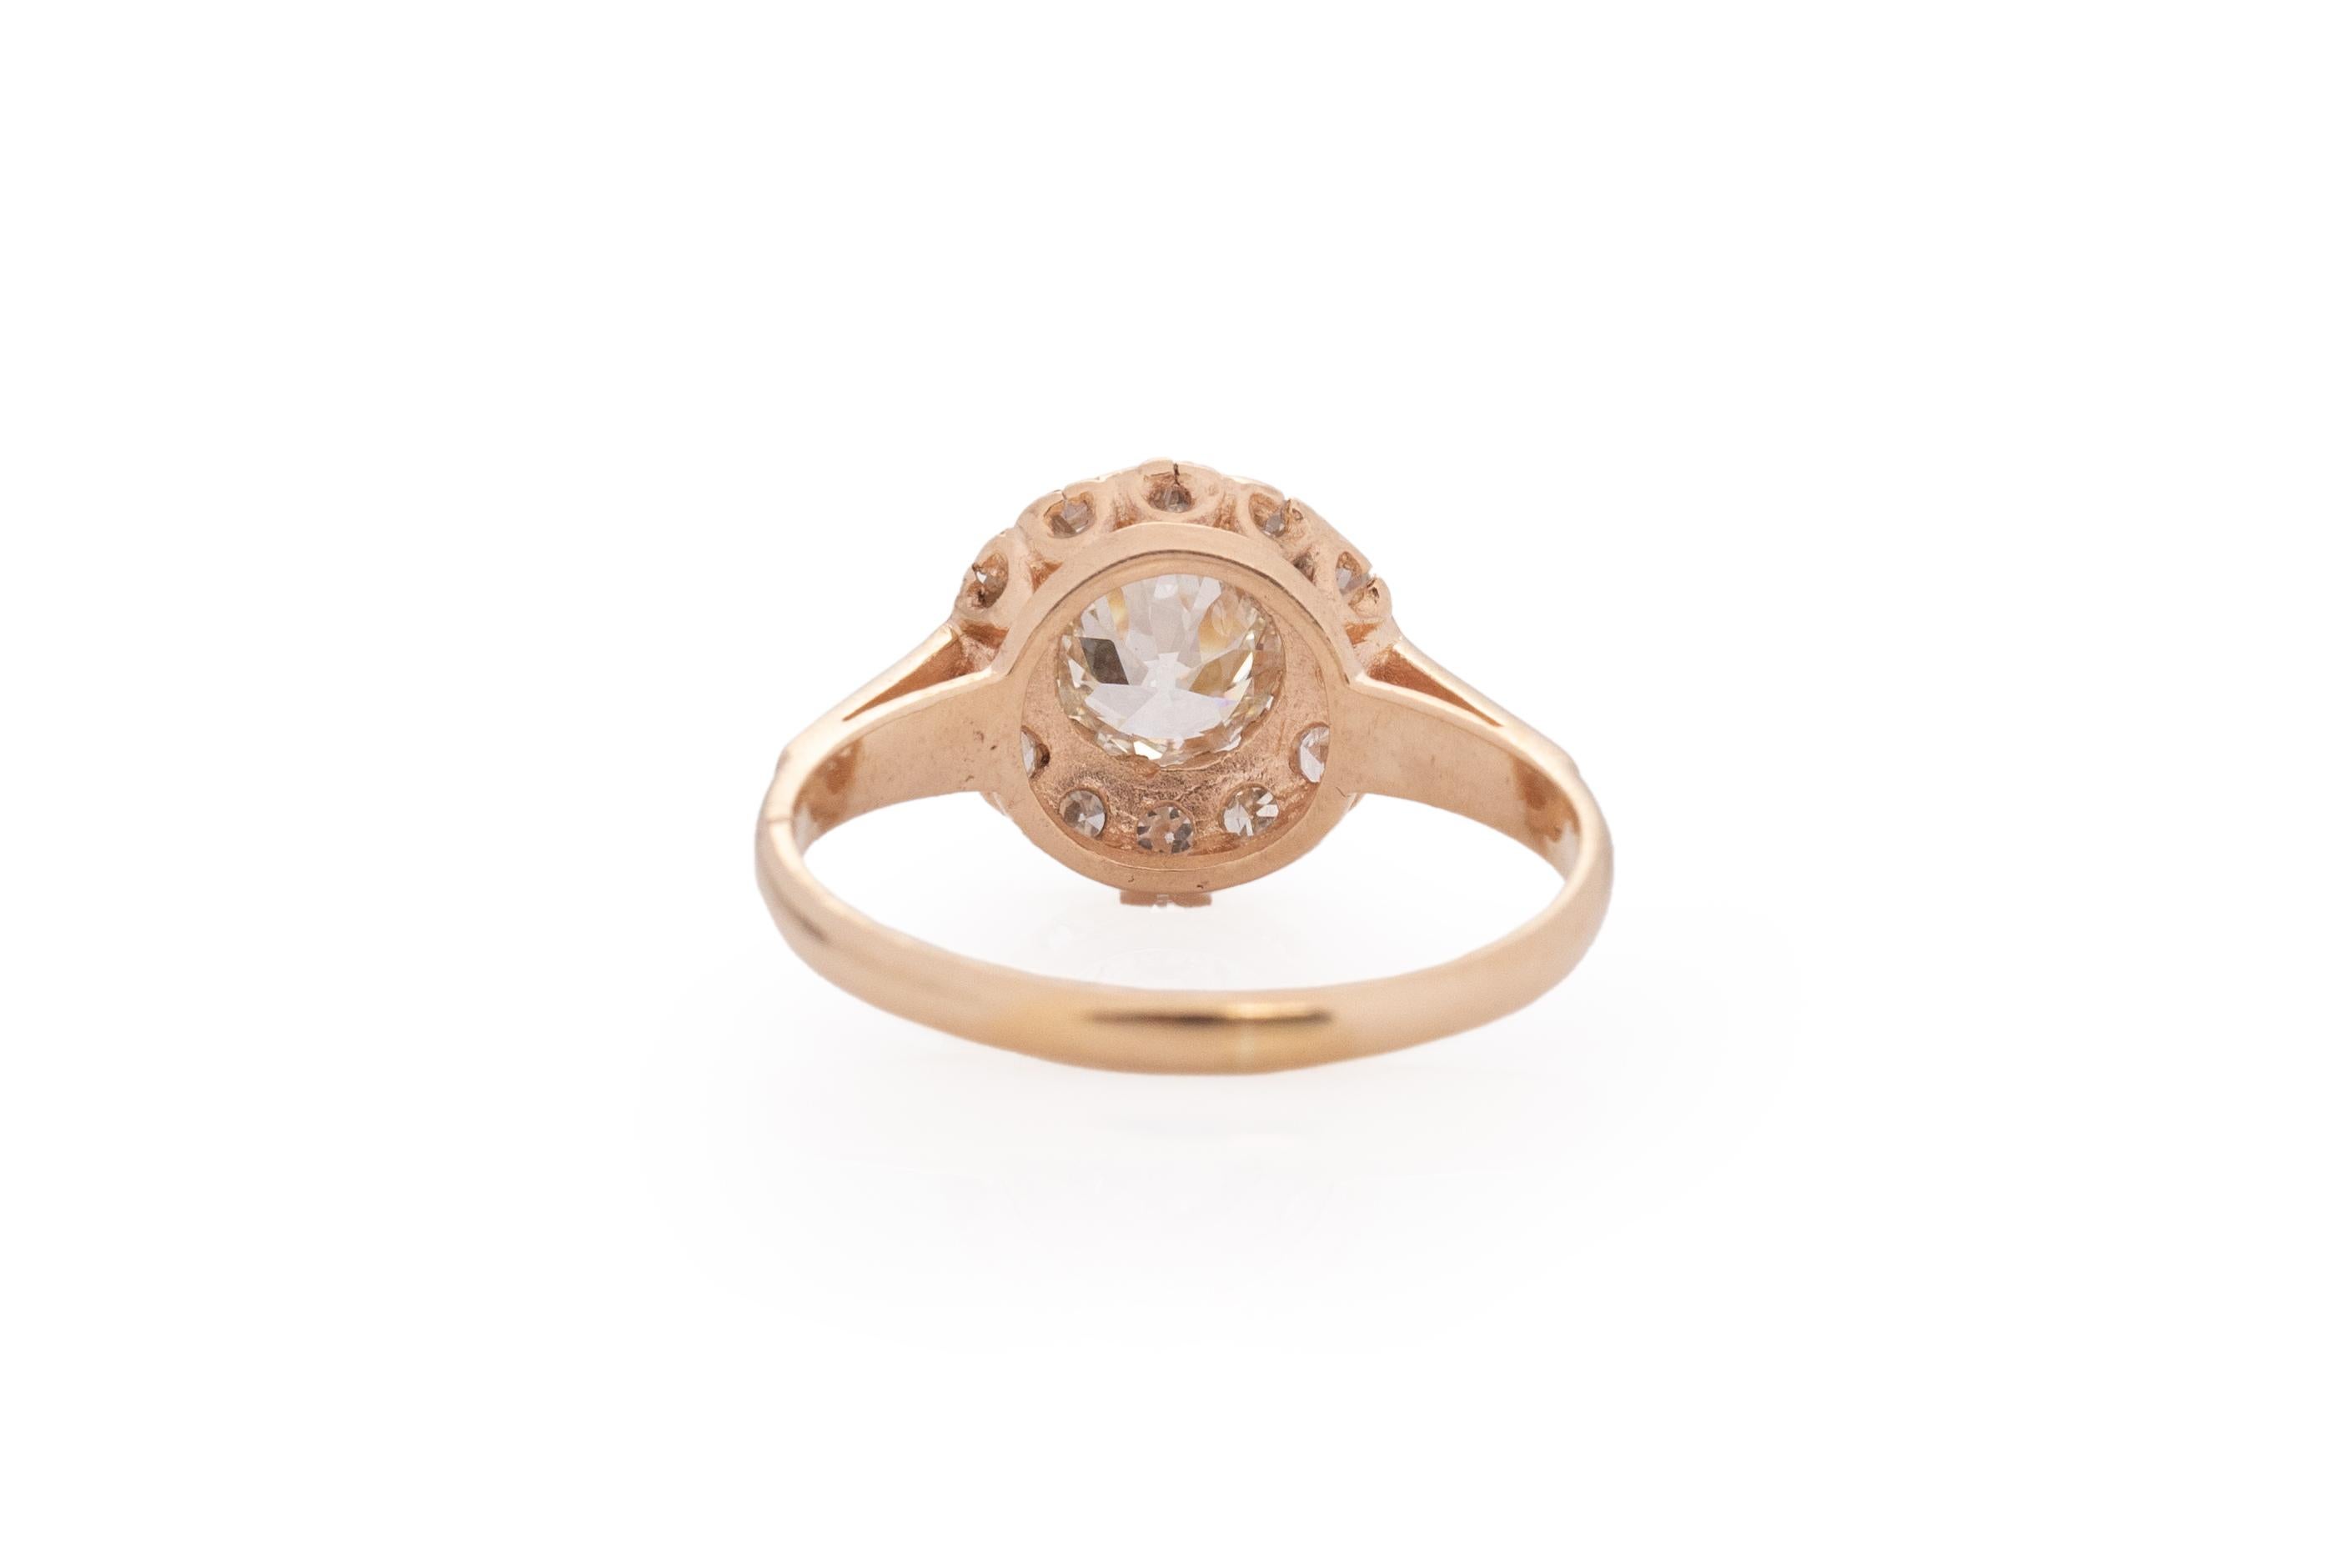 Ring Size: 7.75
Metal Type: 14 Karat Rose Gold [Hallmarked, and Tested]
Weight: 2.0 grams

Center Diamond Details:
GIA REPORT #:5211281520
Weight: .70 carat
Cut: Old European brilliant
Color: K
Clarity: VS1
Measurements: 5.68mm X 5.86mm x